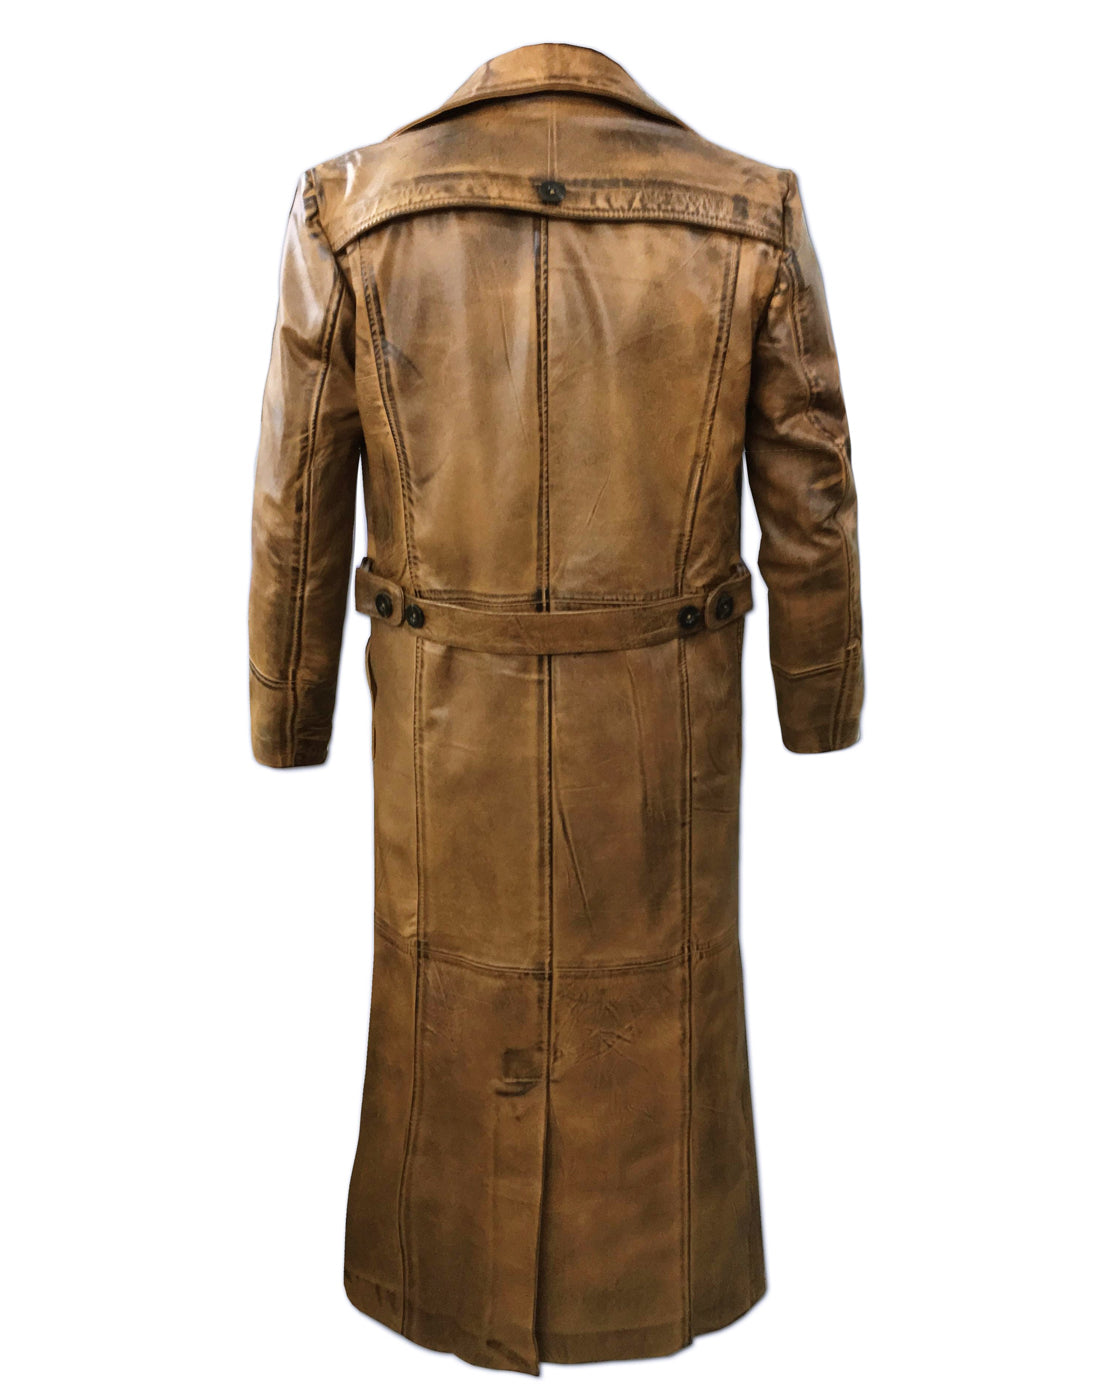 Leather Duster Trench Coat for Men, M